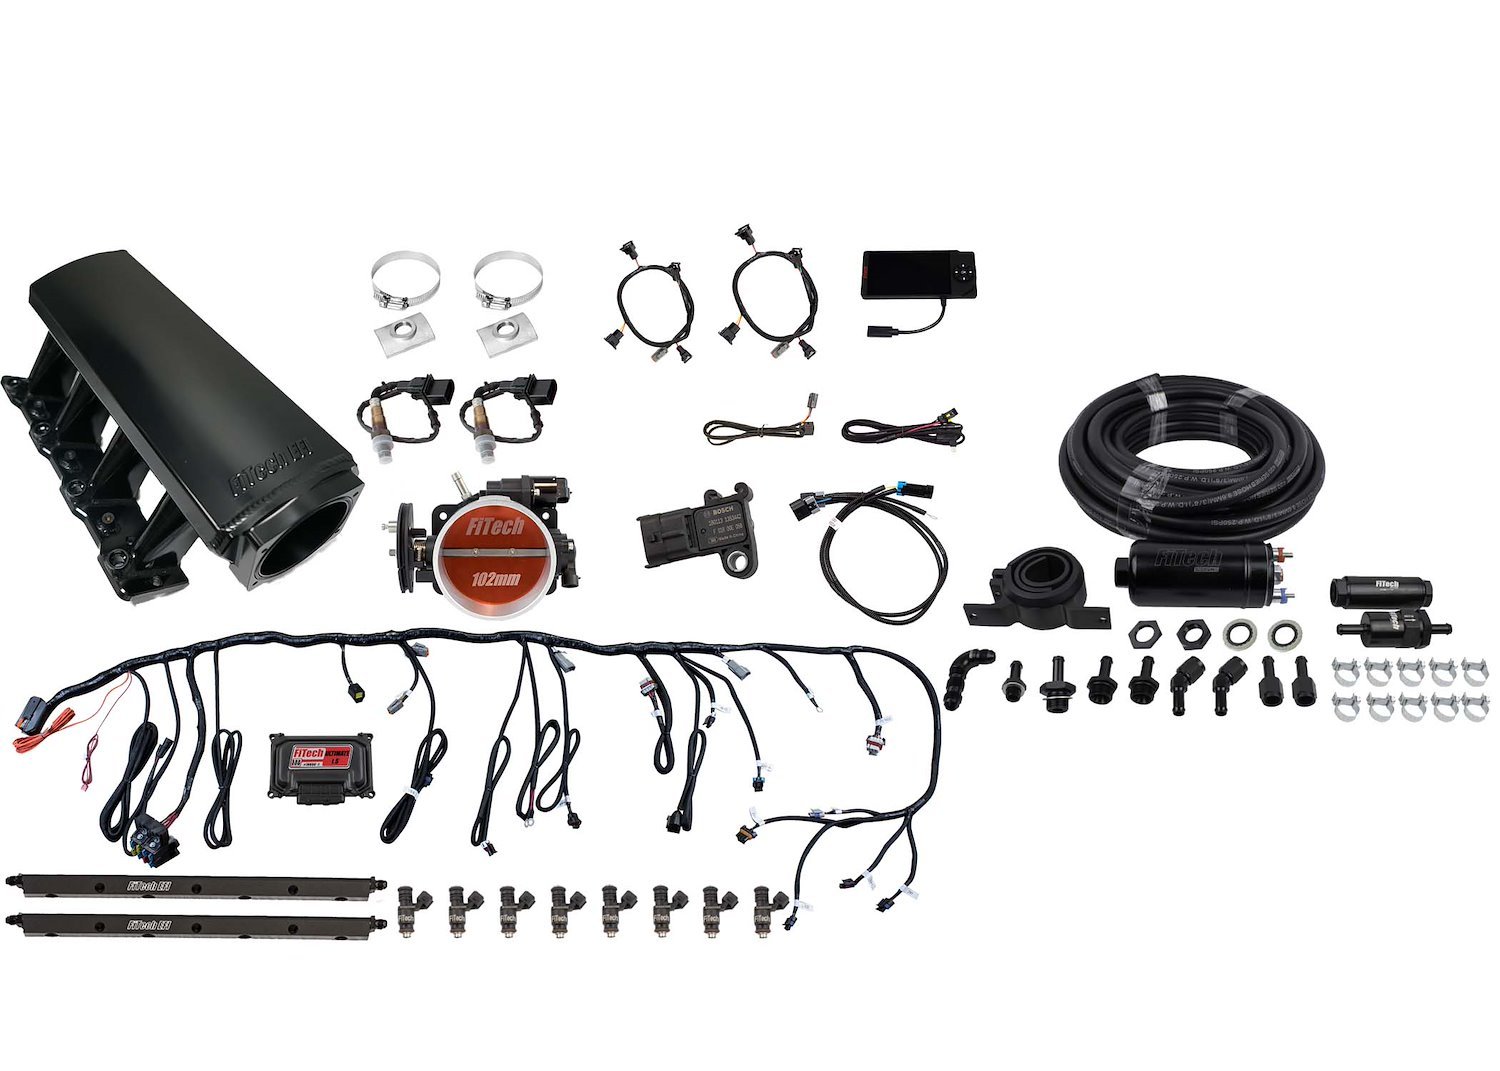 71008 Ultimate LS EFI Tall Induction System LS1/LS2/LS6 750 HP with In-Line Fuel Pump Master Kit